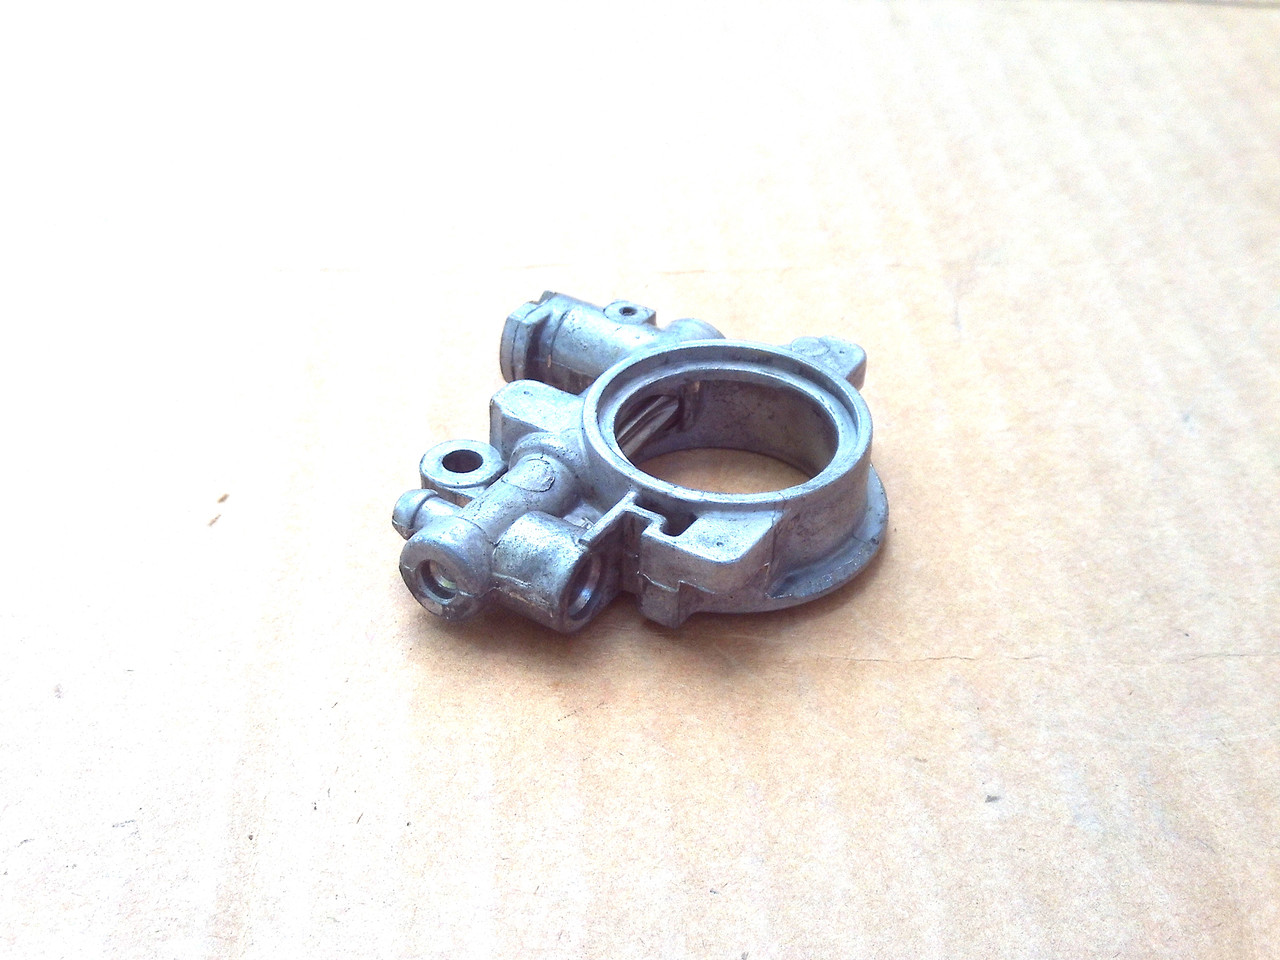 Oil Pump for Stihl MS290 MS390 MS310 MS311 MS391 MS390 029 039 1127 640 3204 1127 640 3200 1127-640-3200